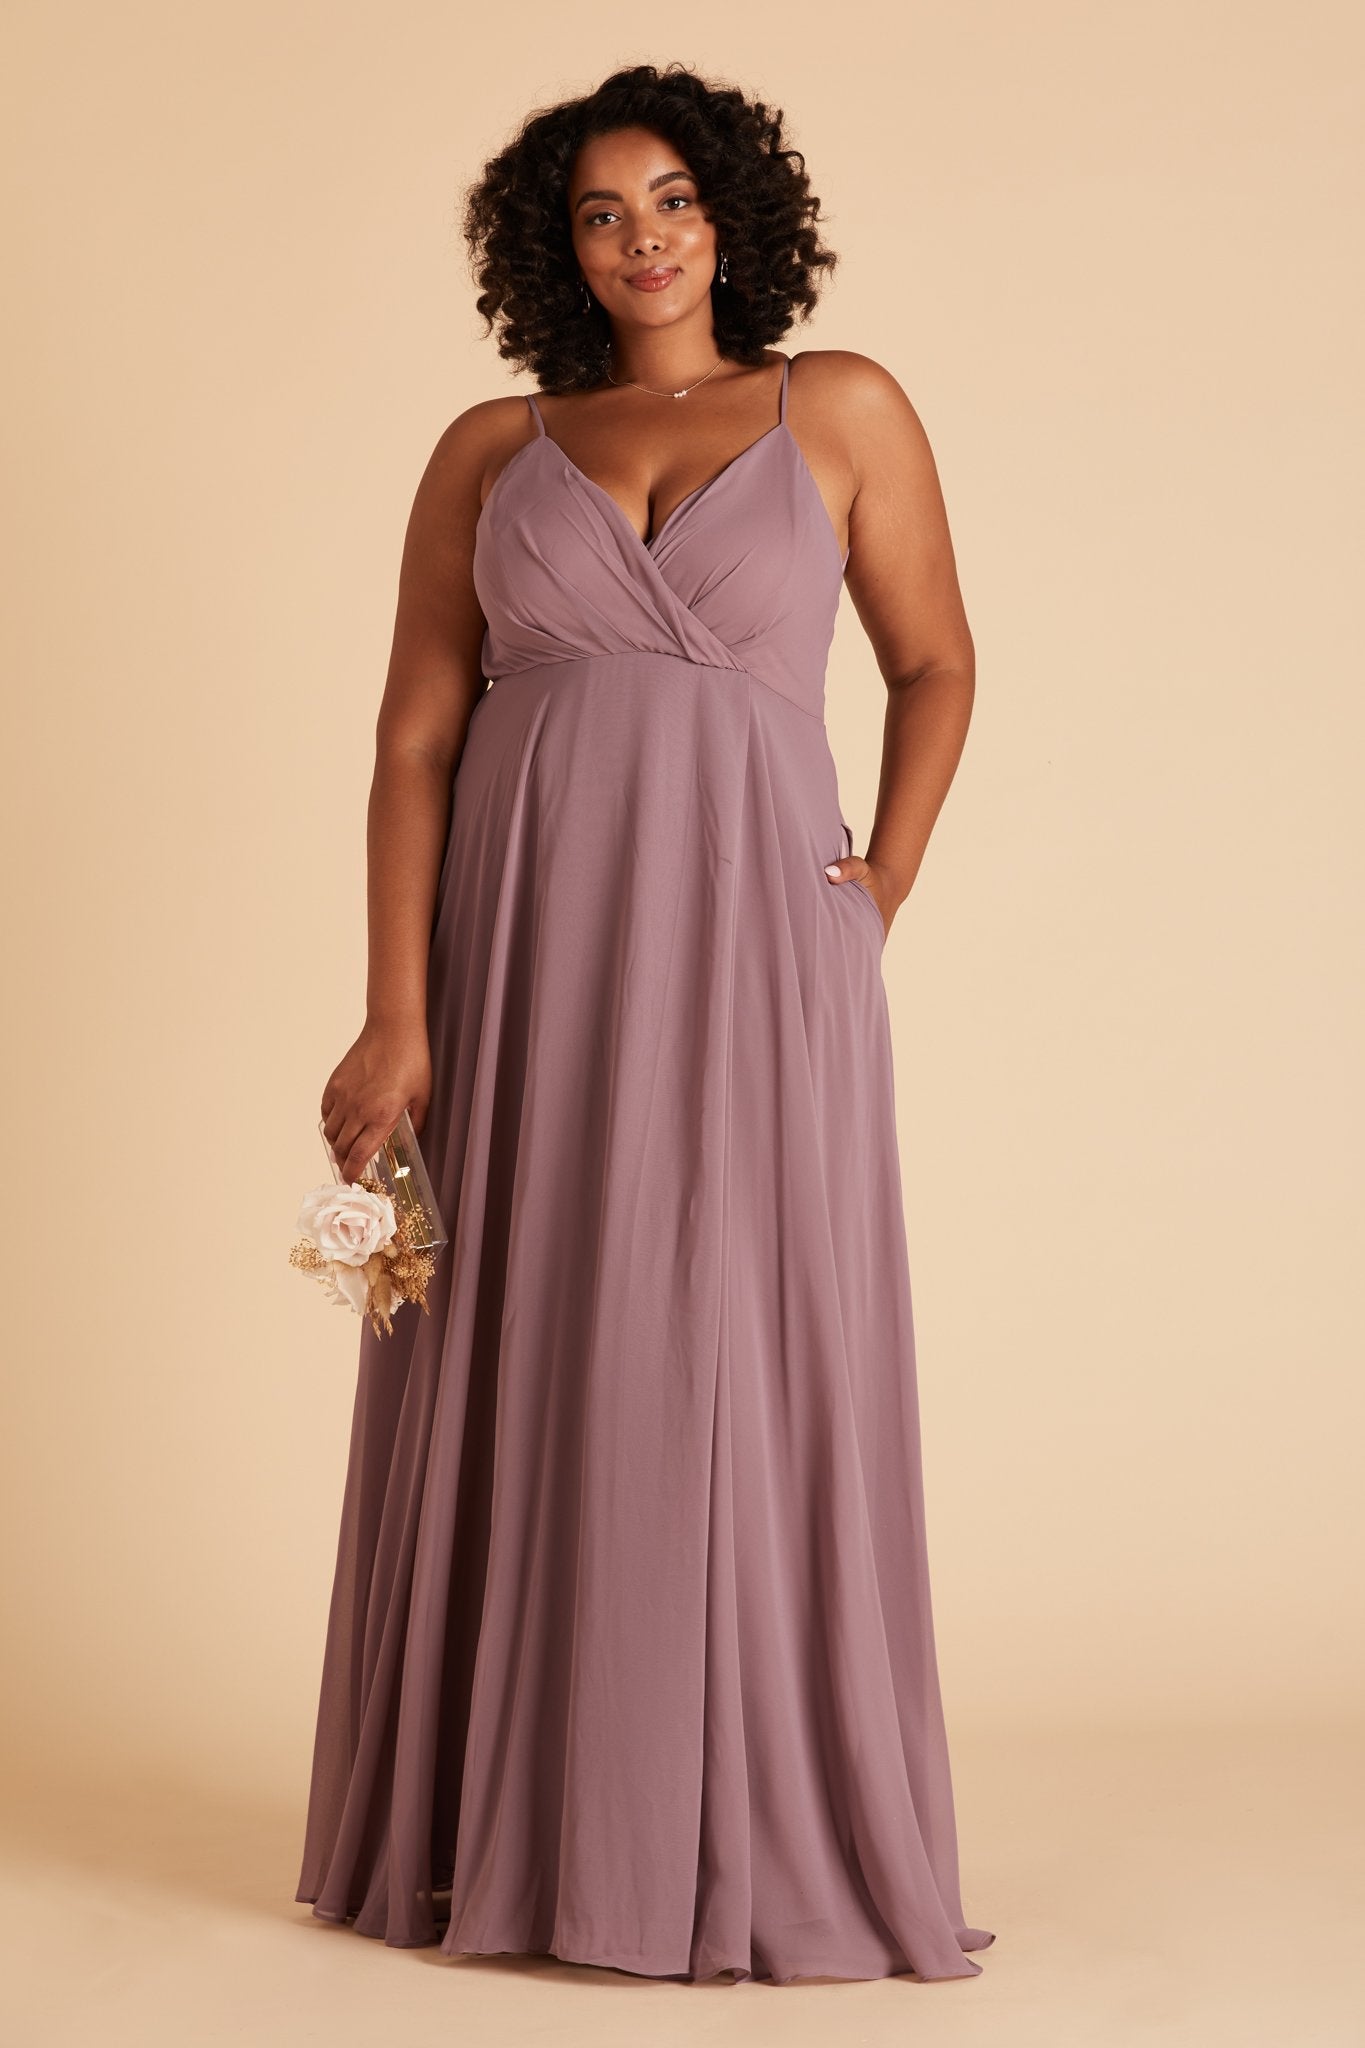 Kaia plus size bridesmaids dress in dark mauve purple chiffon by Birdy Grey, front view with hand in pocket